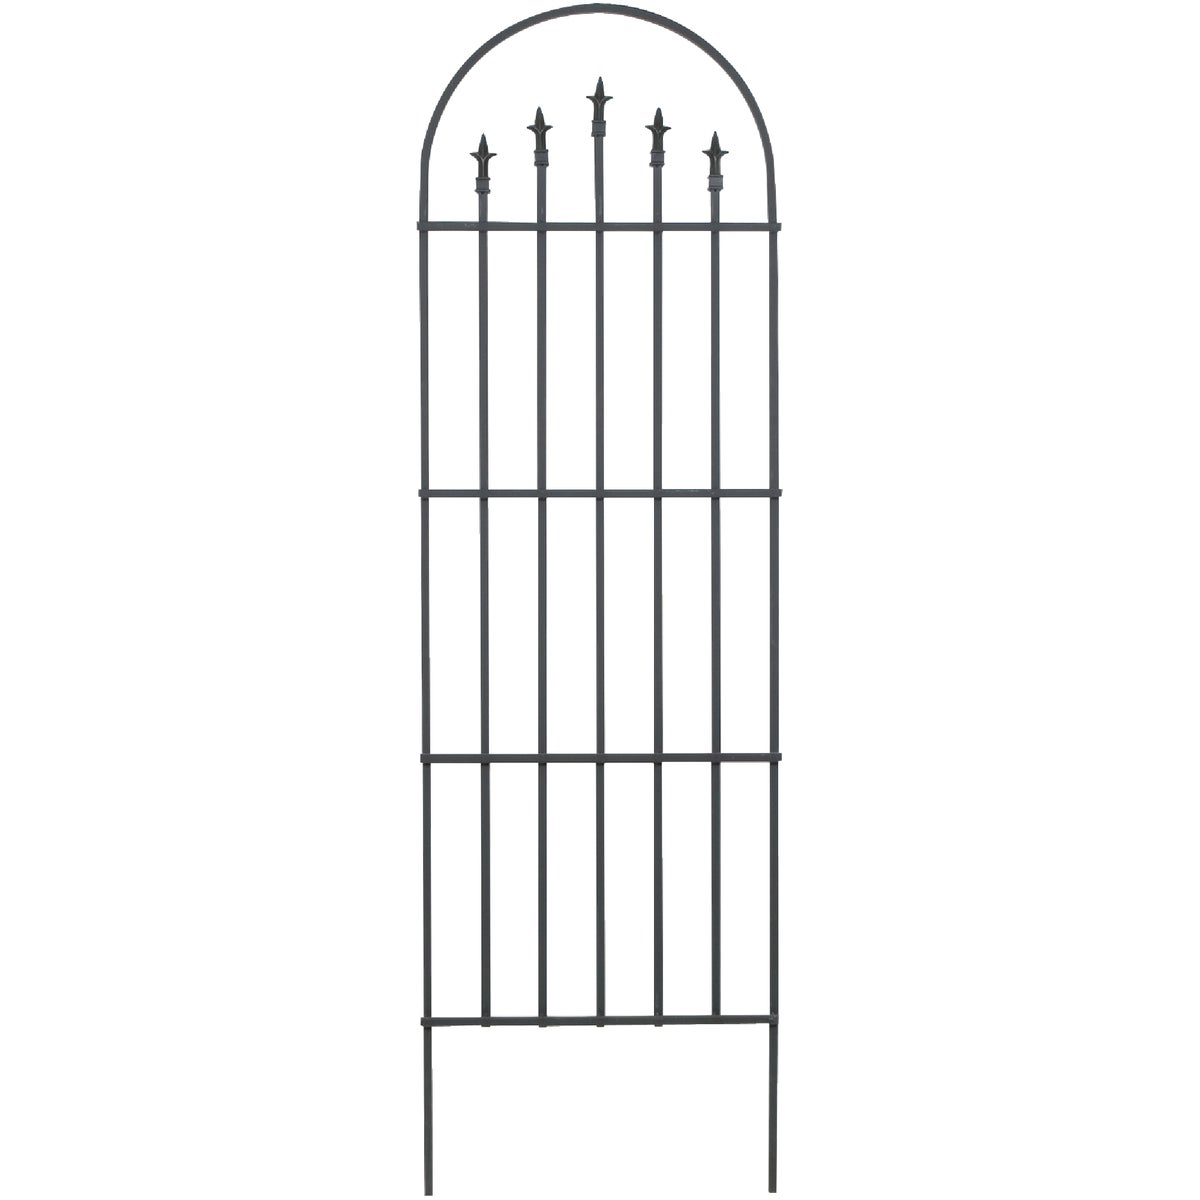 Item 746816, Durable metal garden trellis. Features French arch design with finials.